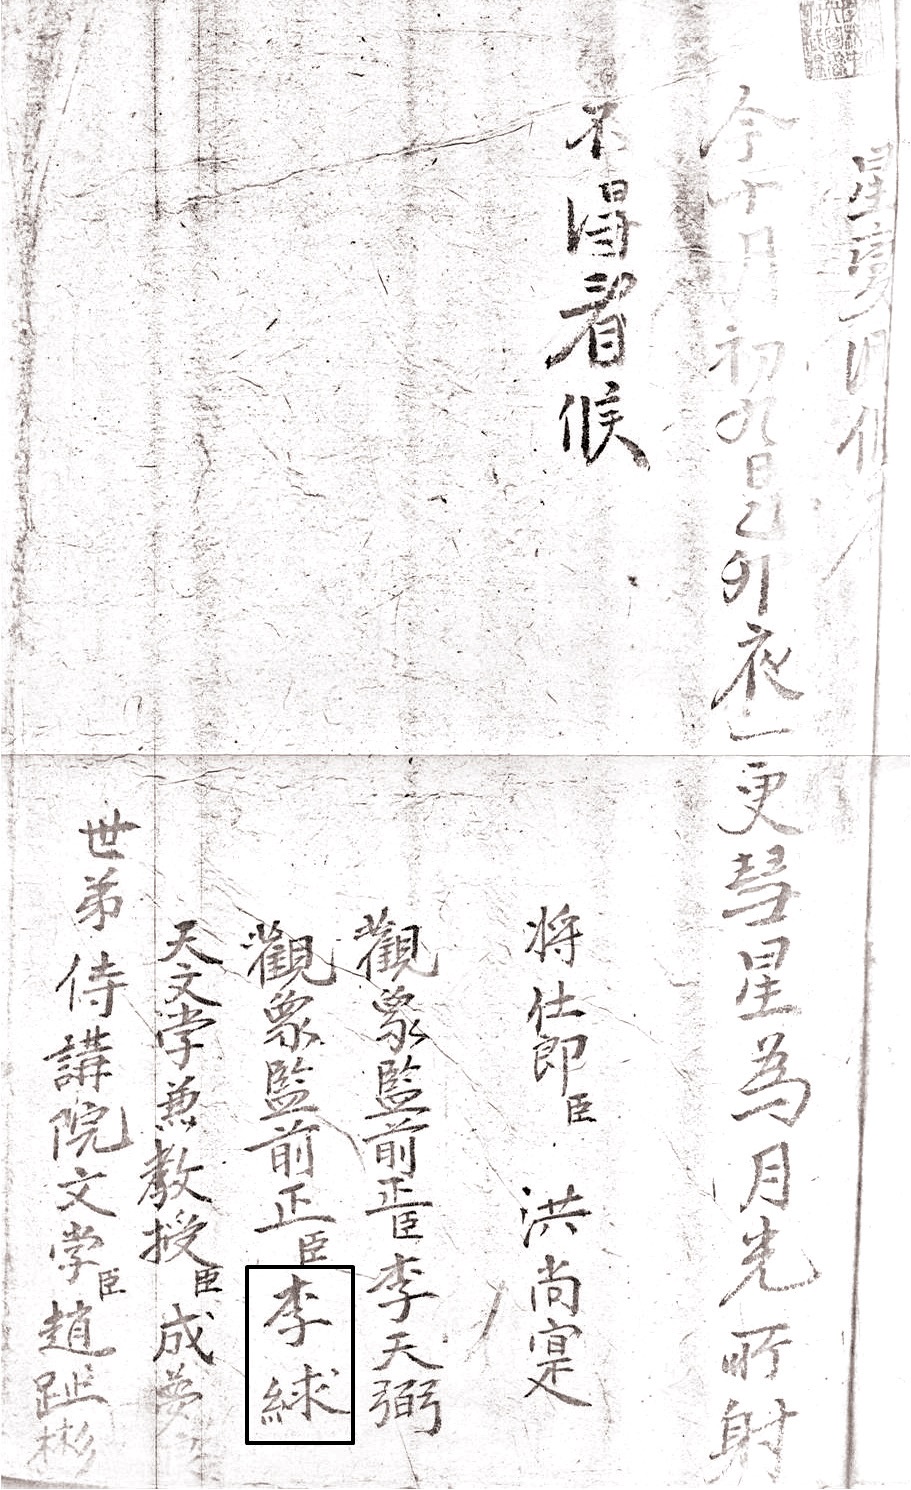 A comet record on the ninth day of the tenth month of the 1723 SeongbyeonDeungrok. Yi Koo (李絿), father of Yi Se-wui (李世？), is seen in the third from right among five observers (Courtesy of Yonsei University Library).